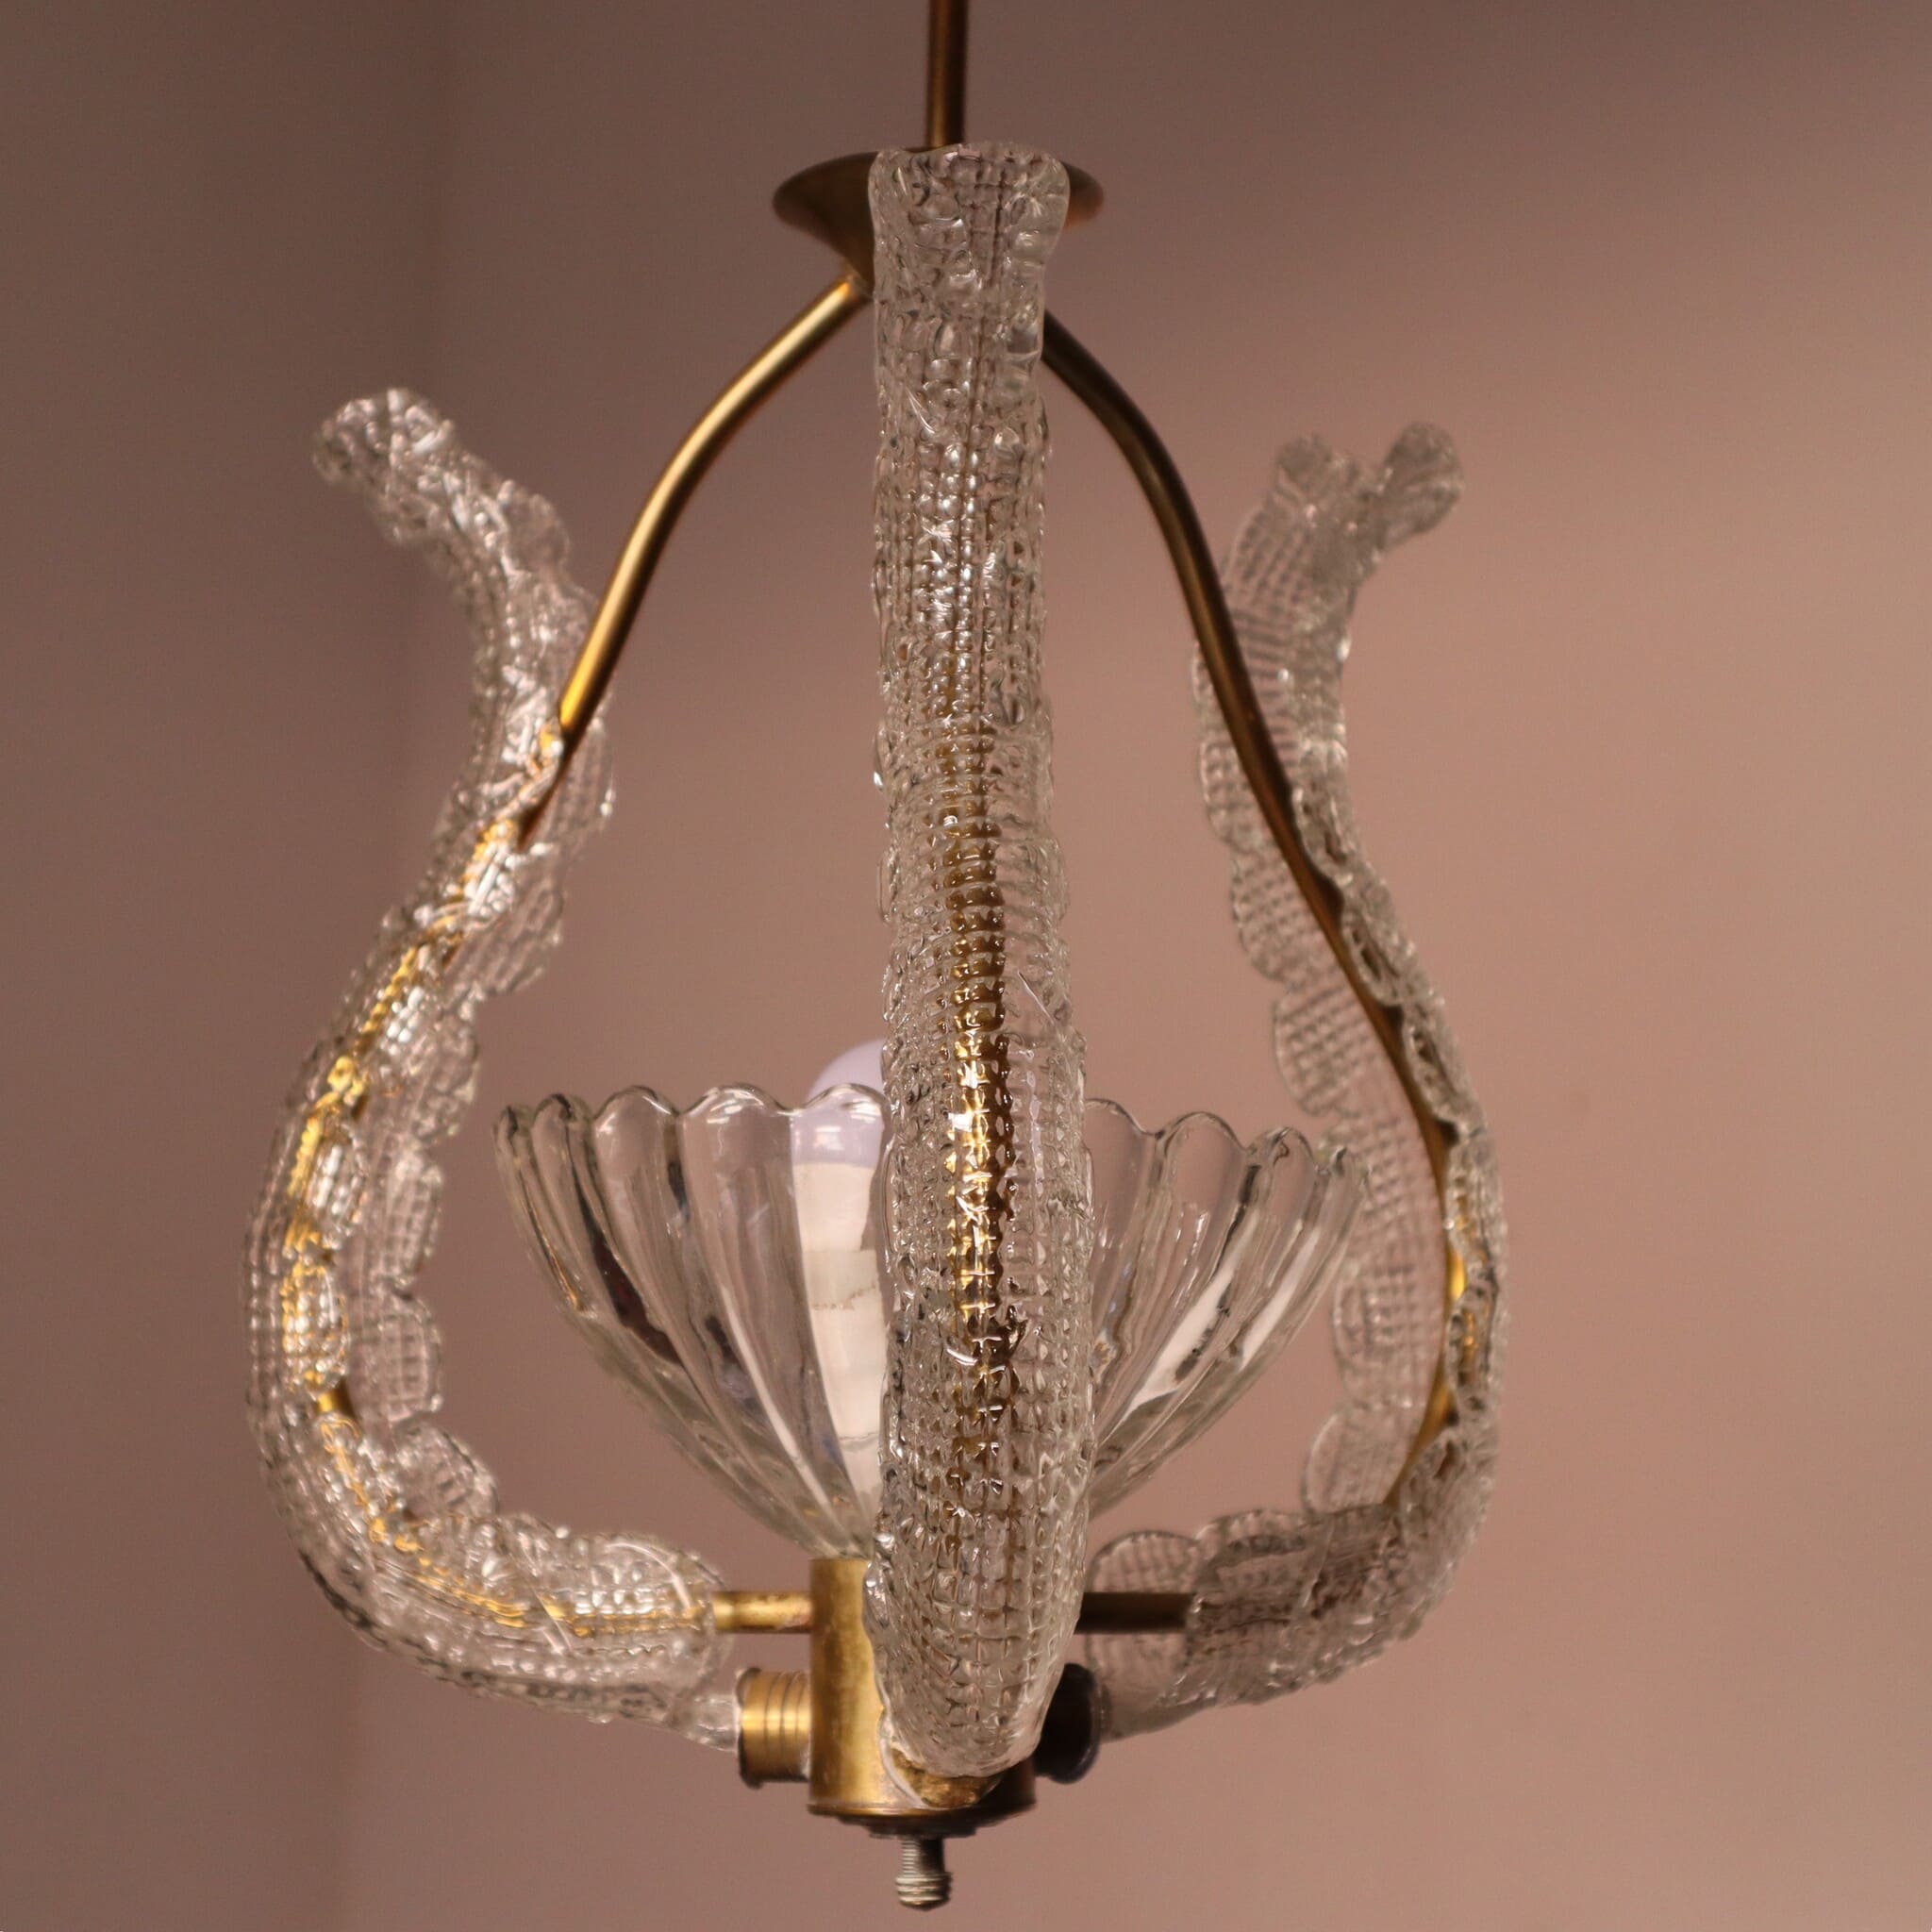 visionidepoca-modern-antique-barovier-chandelier-1940s-art-deco-vintage-3-arms-in-murano-glass-and-brass-full-view-off-close-up